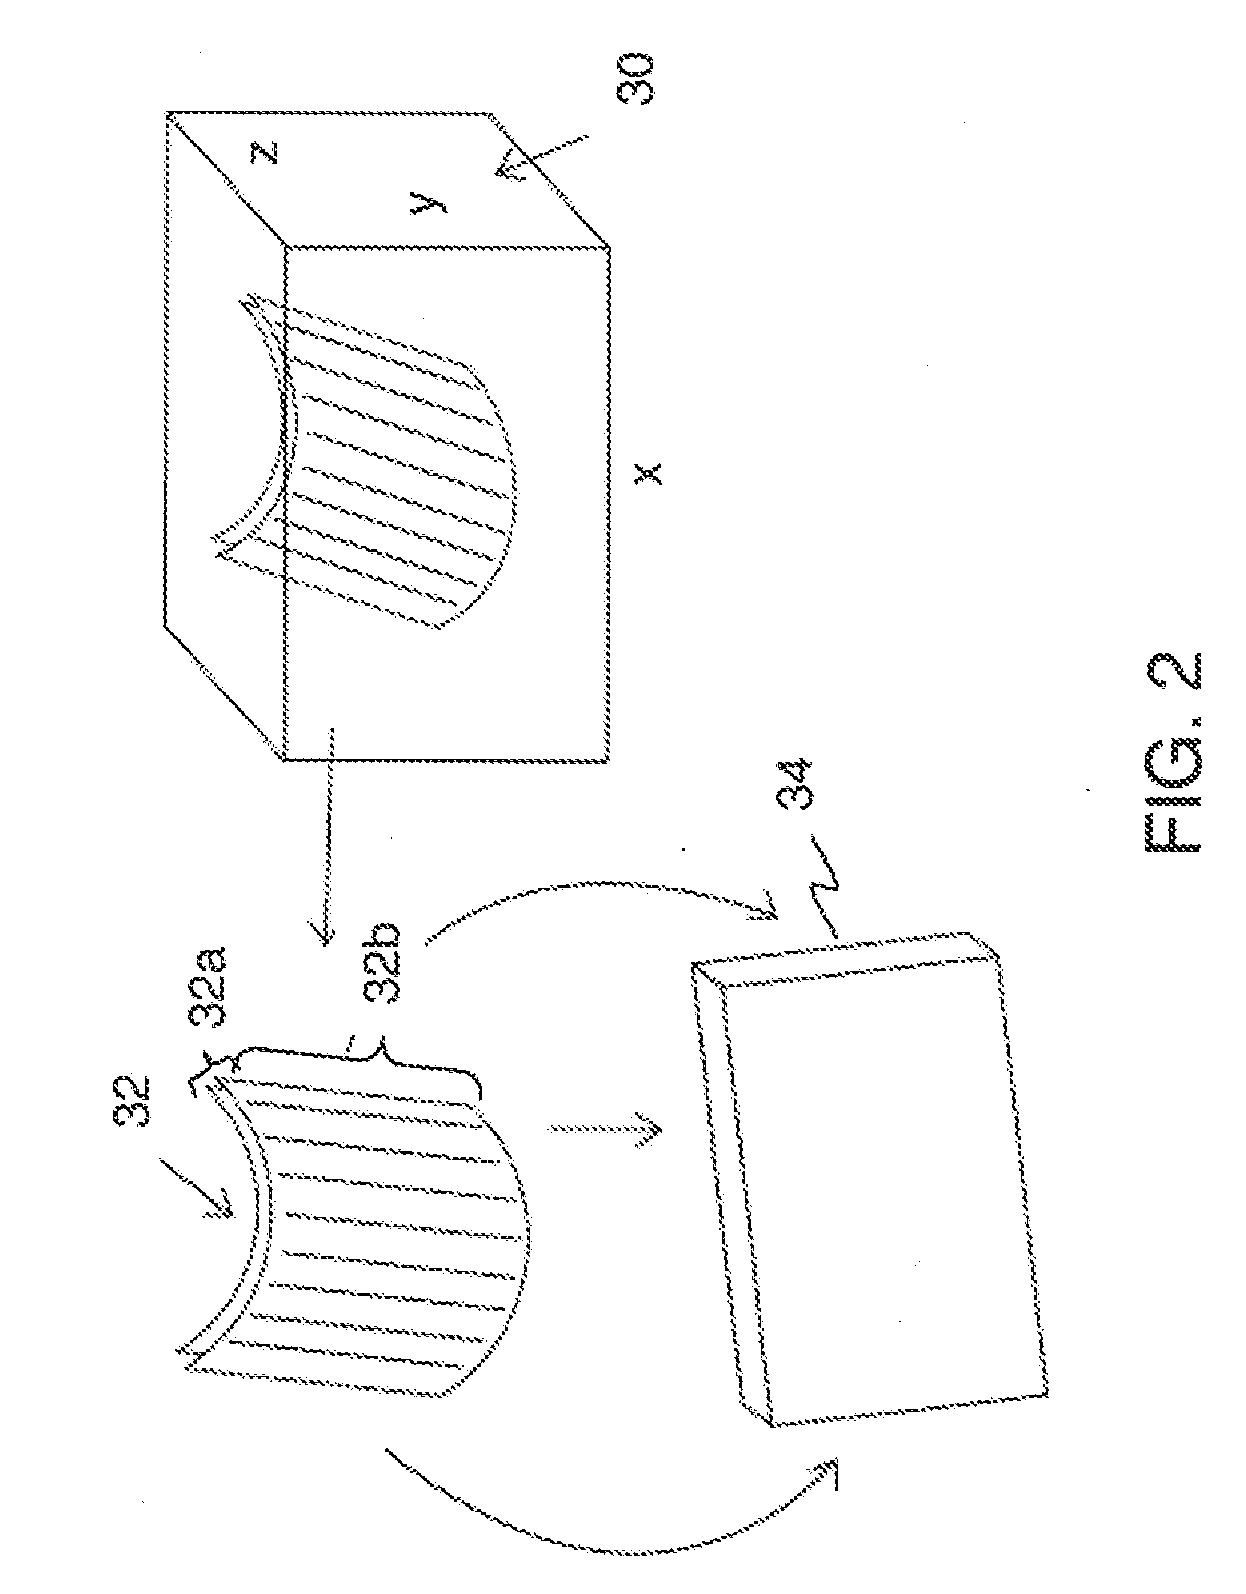 System and method for locating anatomies of interest in a 3D volume